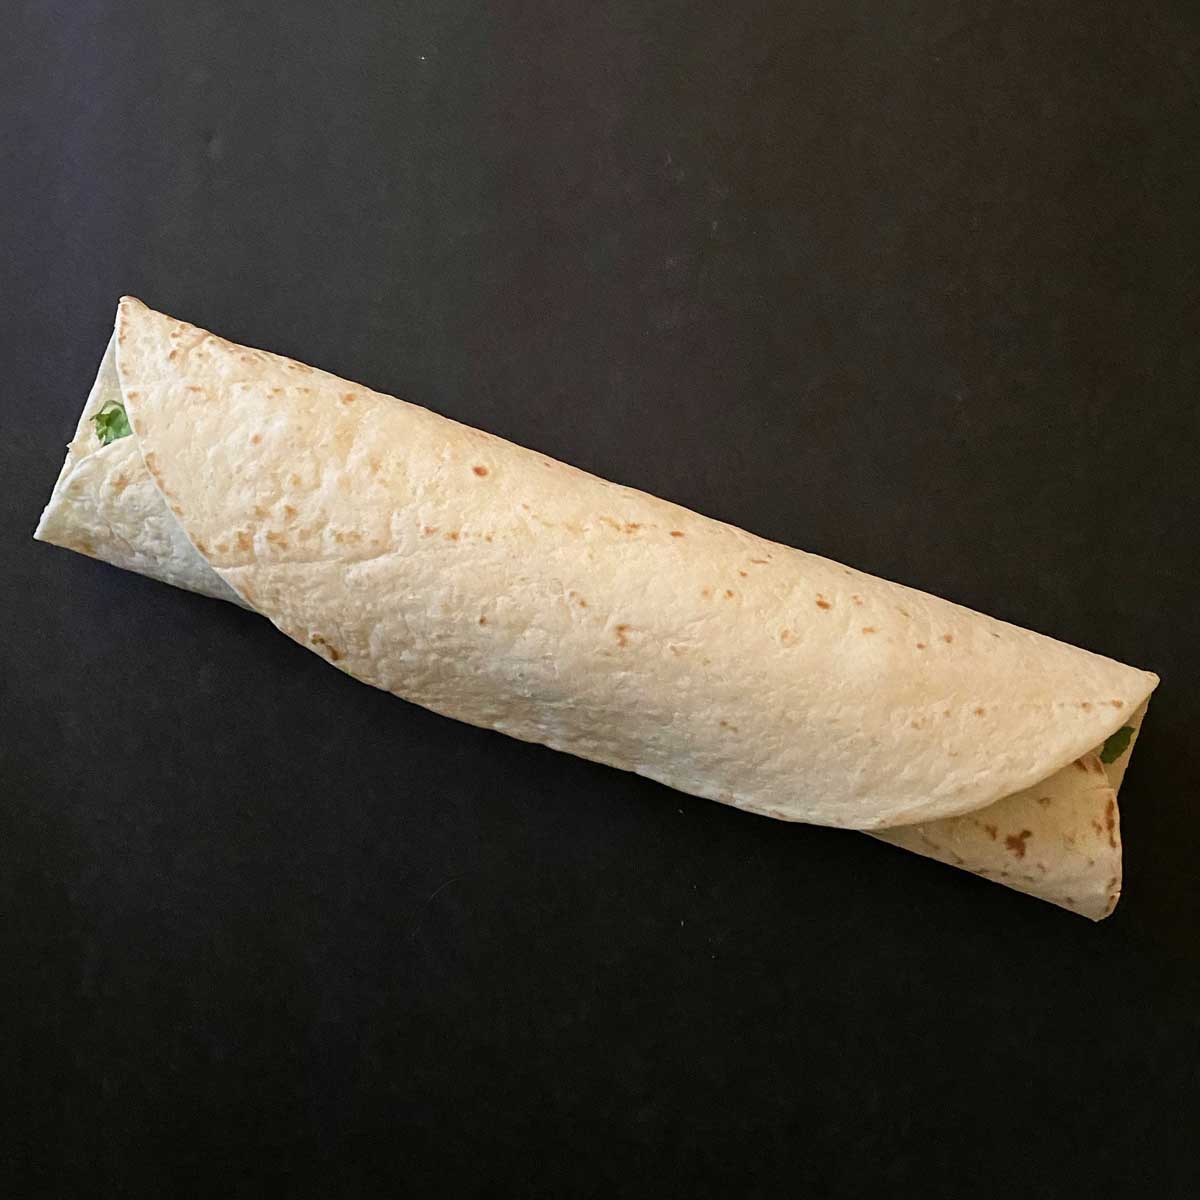 A large flour tortilla tightly wrapped around the chicken bacon filling.